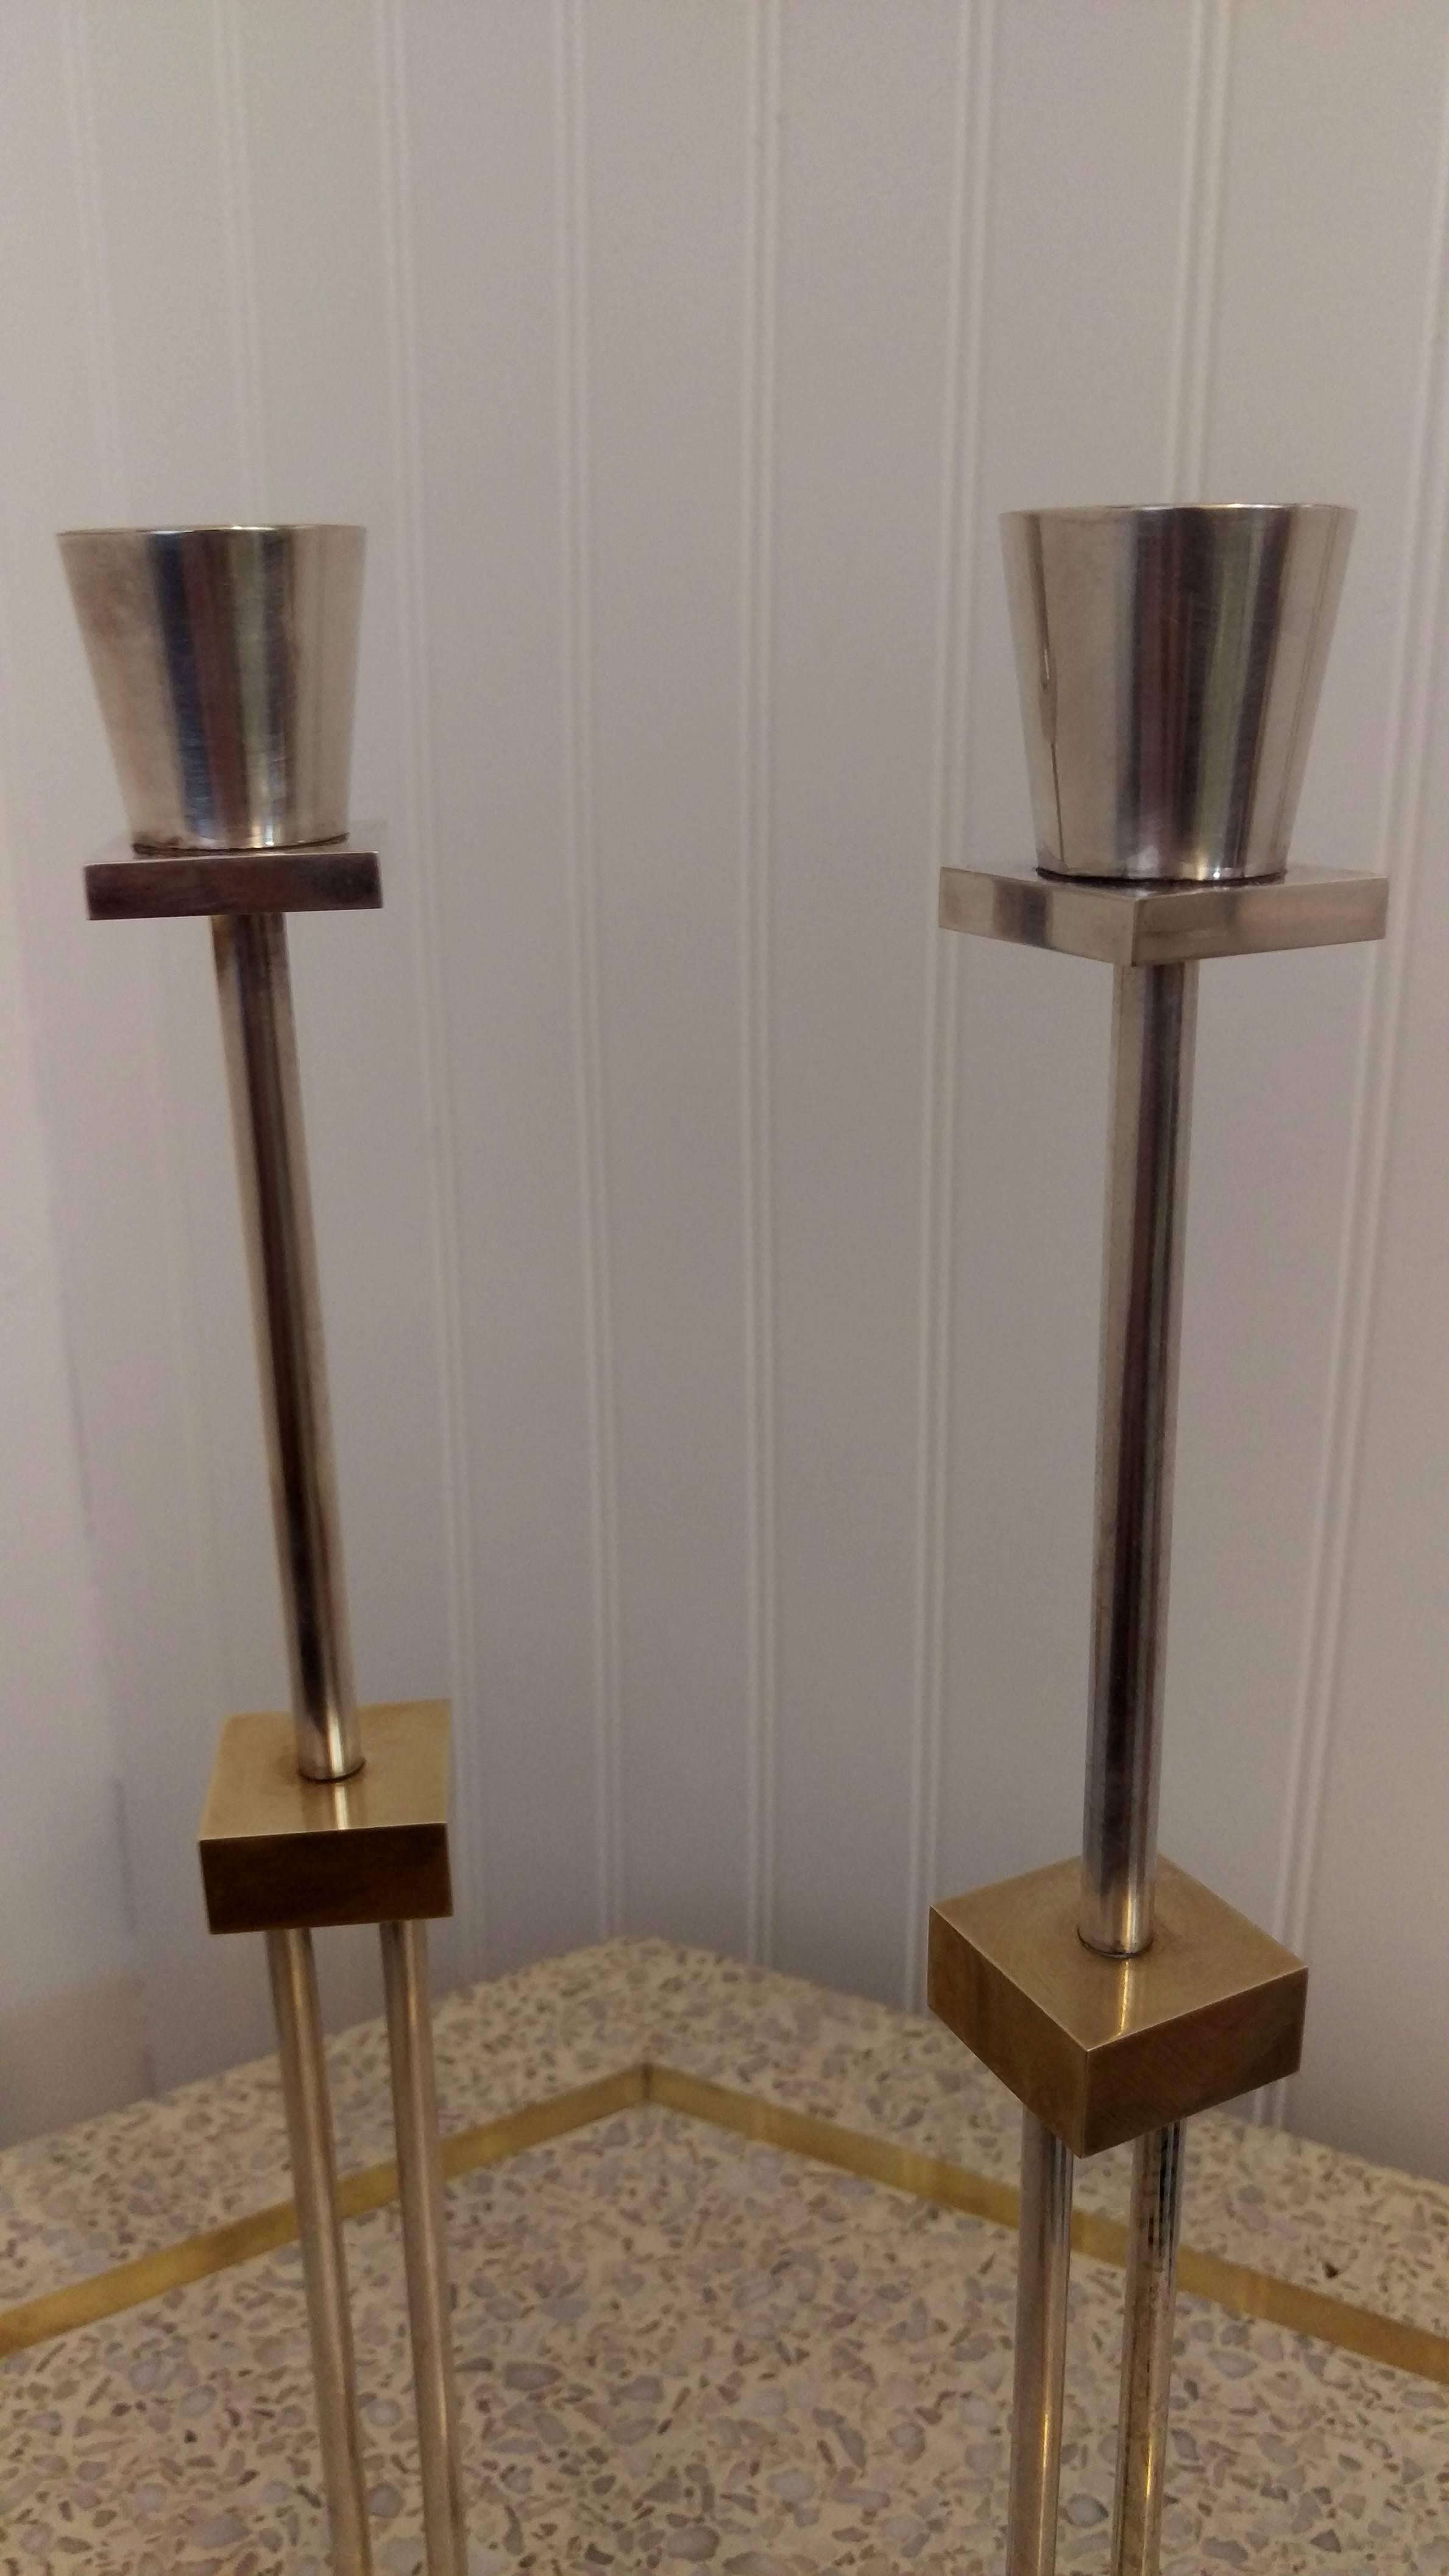 Pair of Architectural Candlesticks by Ettore Sottsass for Swid Powell, La Porte In Excellent Condition For Sale In Southampton, NY